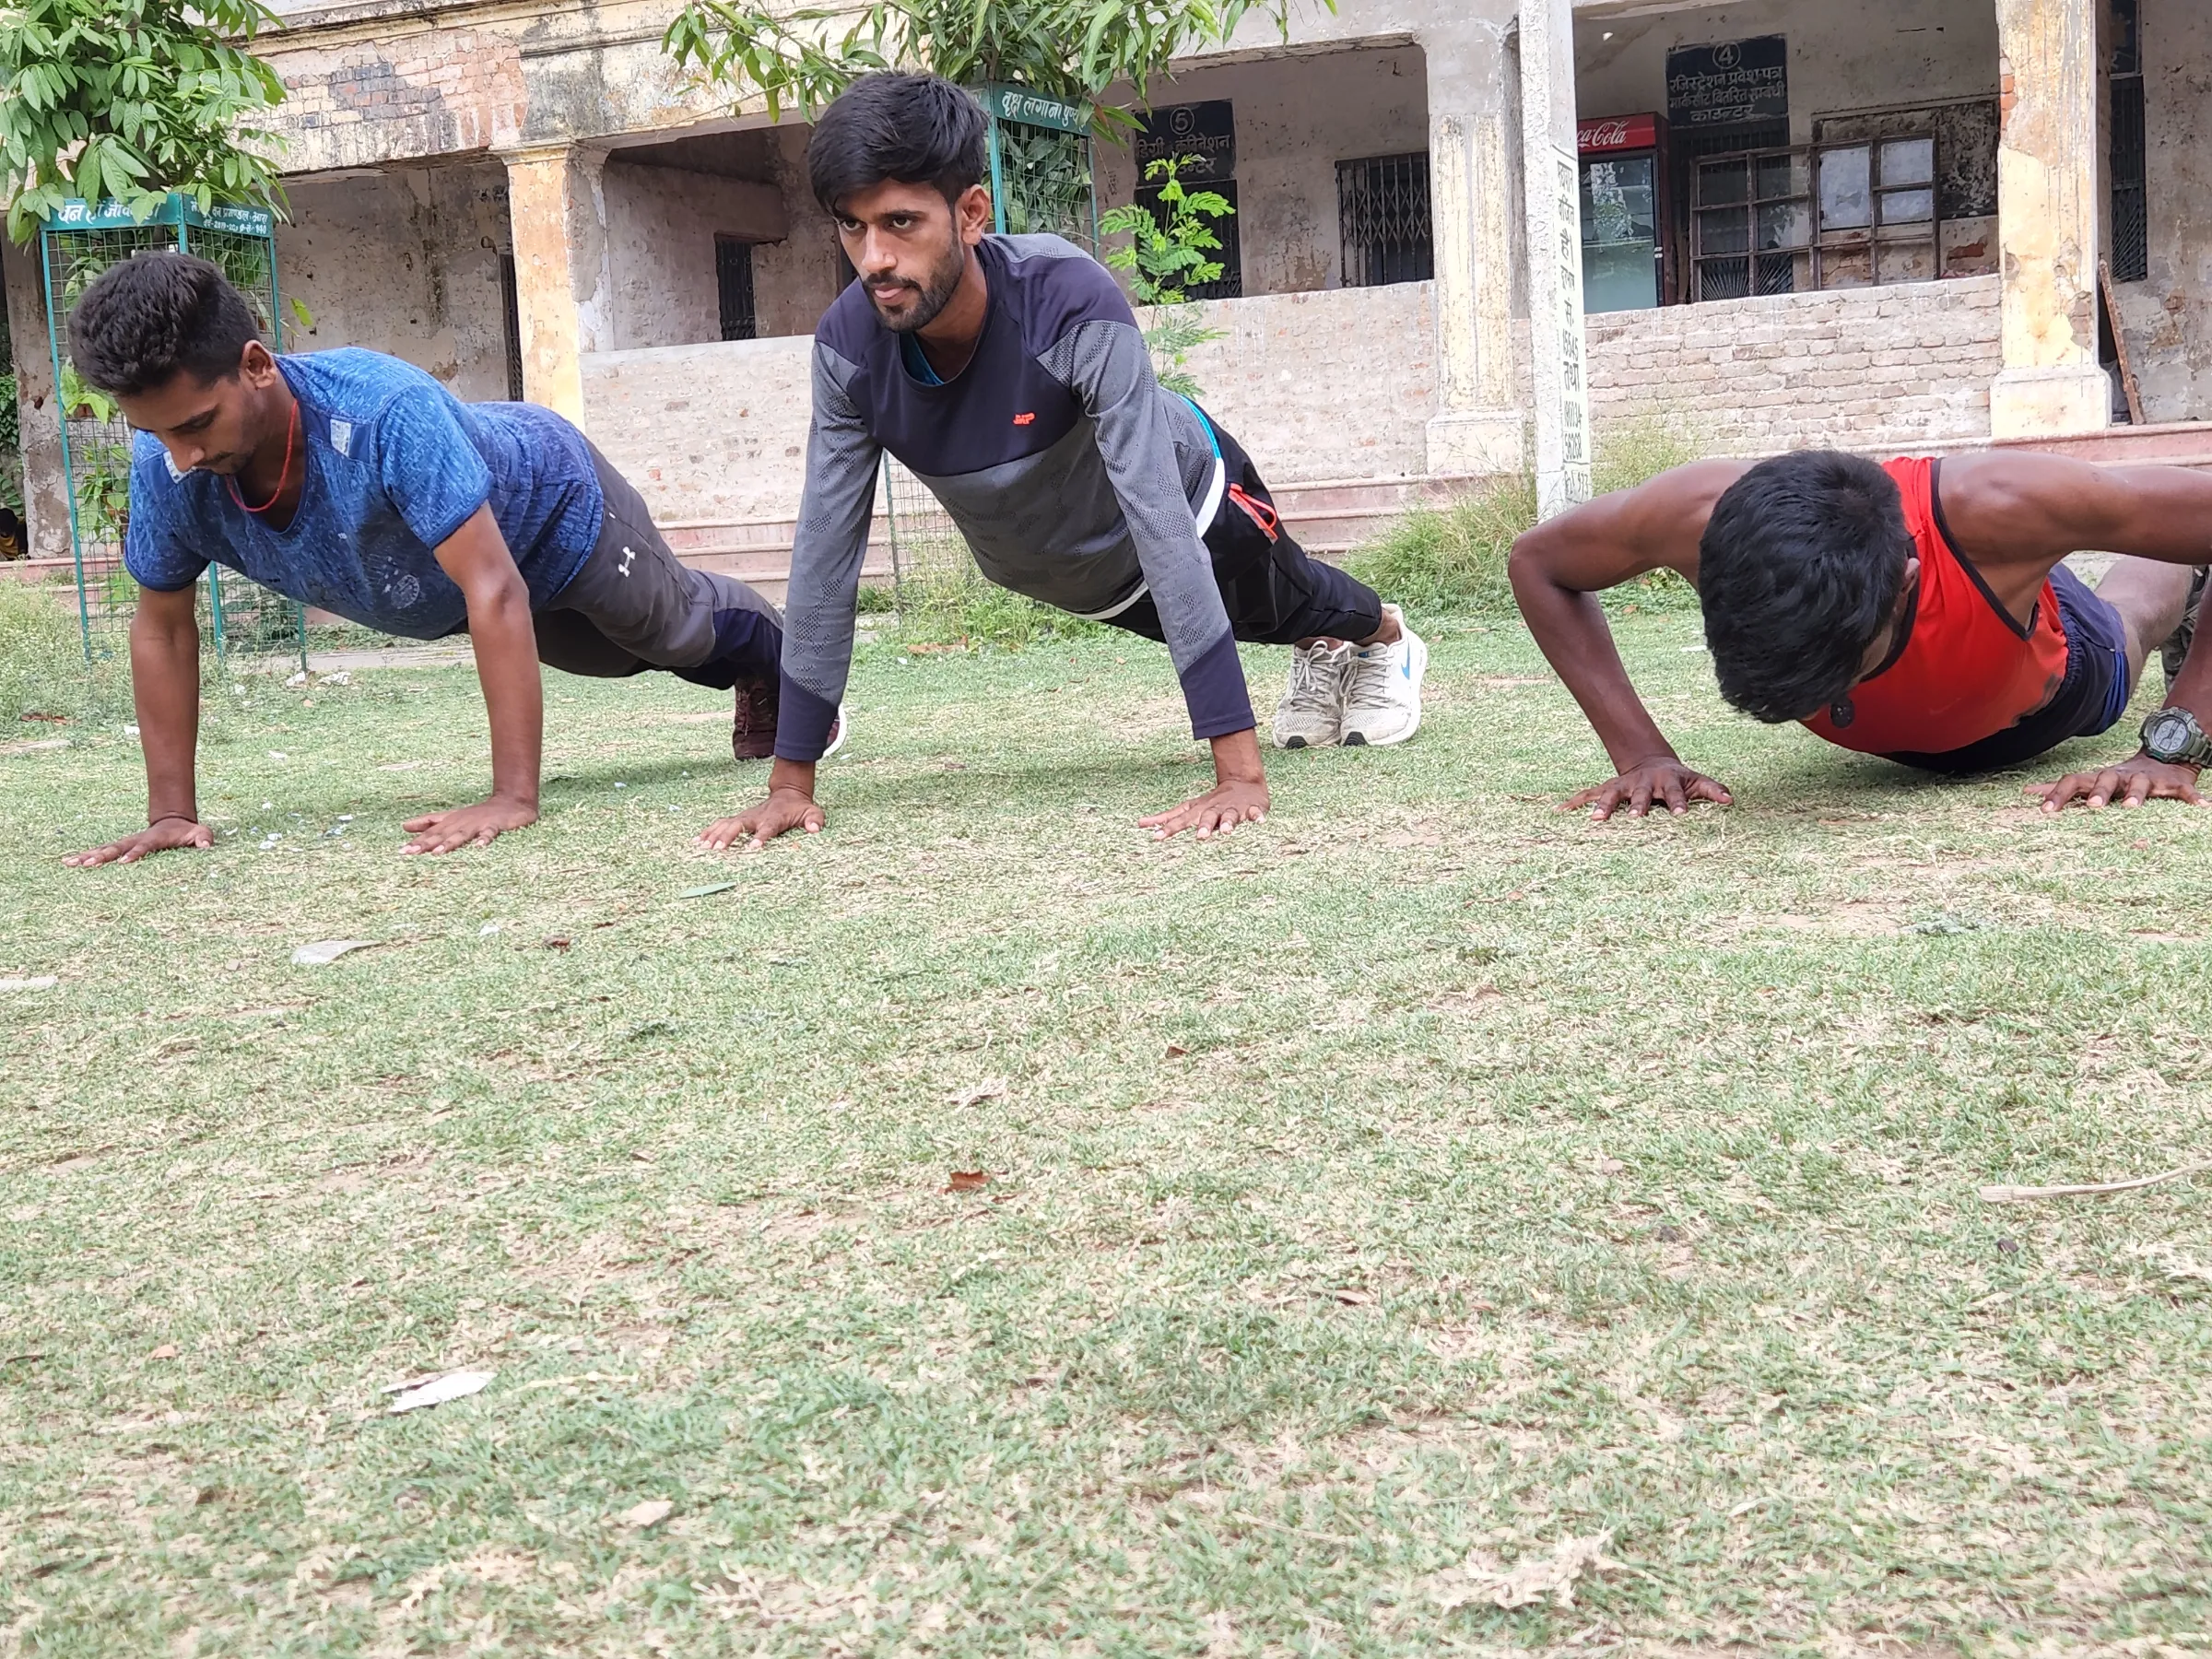 Young army aspirants do push-ups with as part of their military training